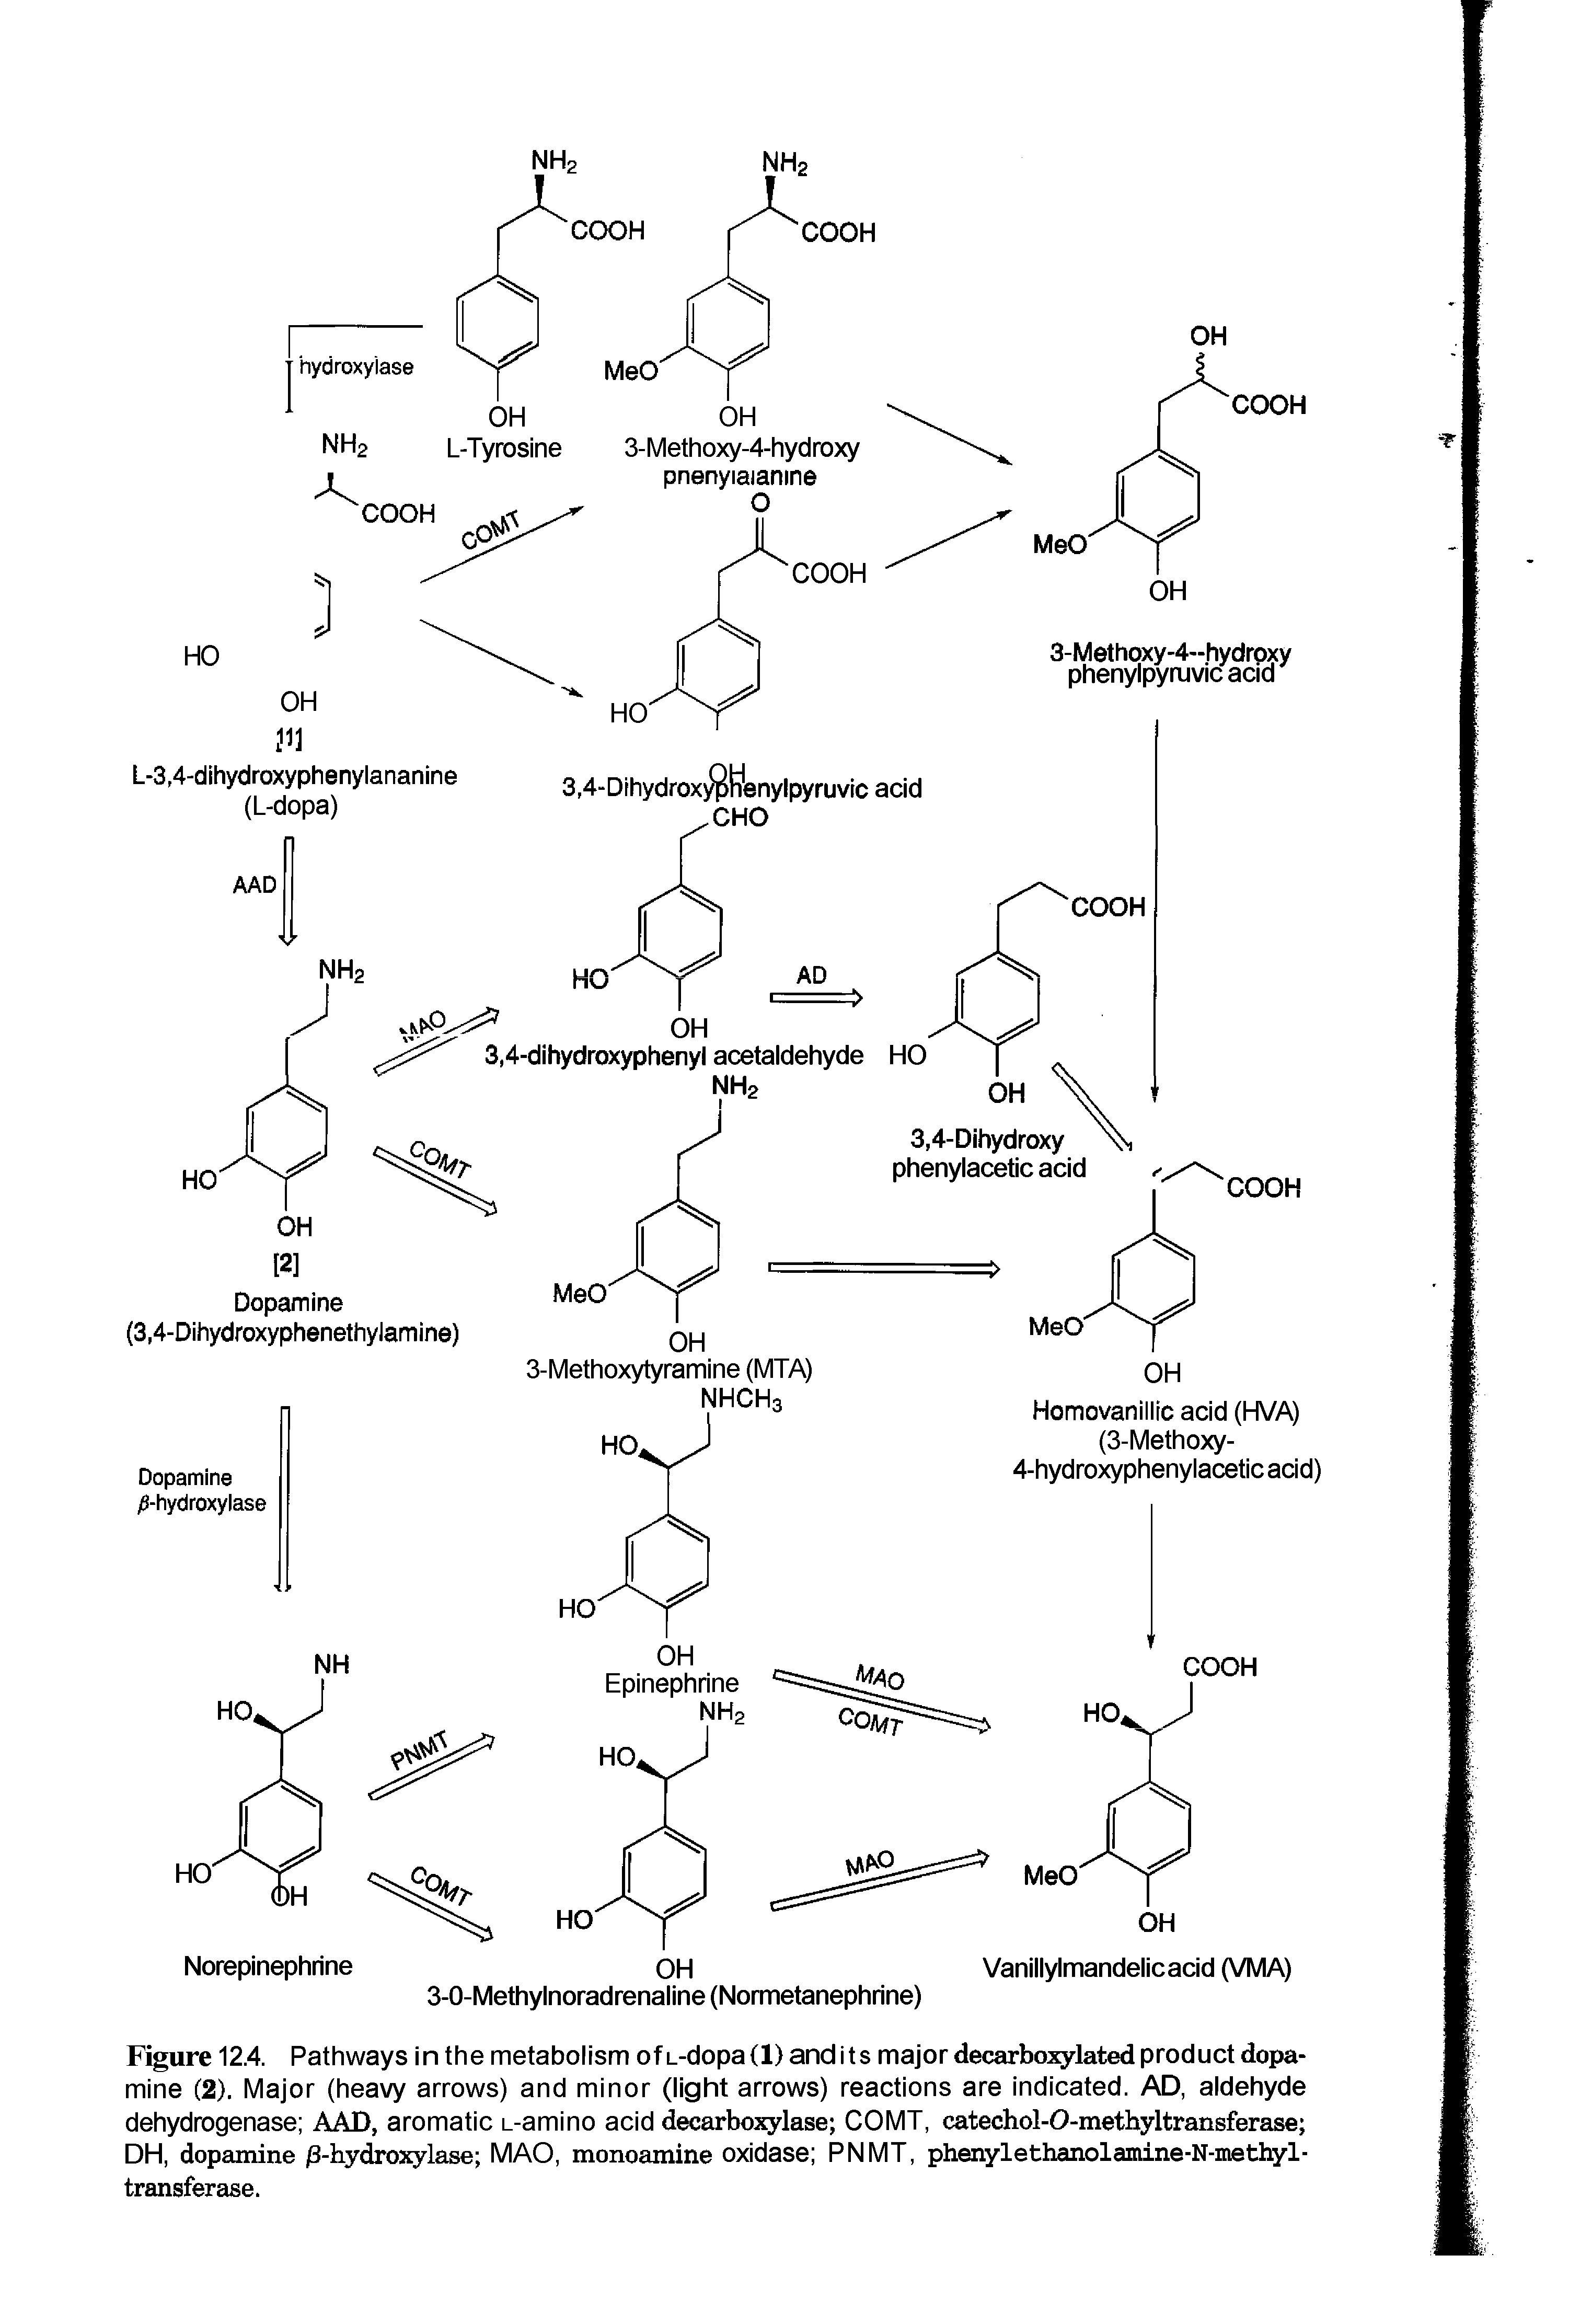 Figure 12.4. Pathways in the metabolism of L-dopa (1) and its major decarboxylated product dopamine (2). Major (heavy arrows) and minor (light arrows) reactions are indicated. AD, aldehyde dehydrogenase AAD, aromatic L-amino acid decarboxylase COMT, catechol-O-methyltransferase DH, dopamine jS-hydroxylase MAO, monoamine oxidase PNMT, phenylethanolamine-N-methyl-transferase.